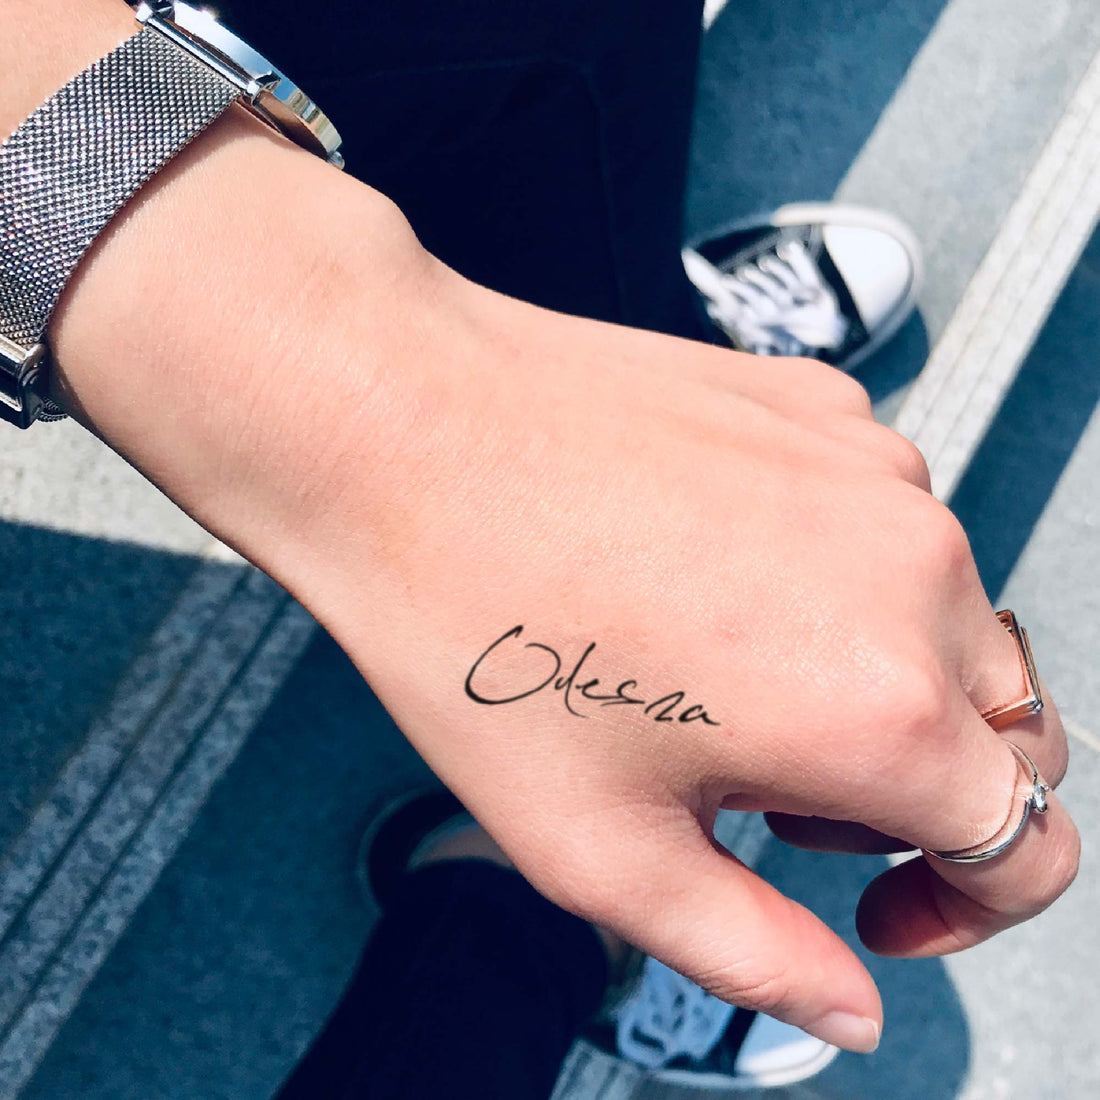 Odesza custom temporary tattoo sticker design idea inspiration meanings removal arm wrist hand words font name signature calligraphy lyrics tour concert outfits merch accessory gift souvenir costumes wear dress up code